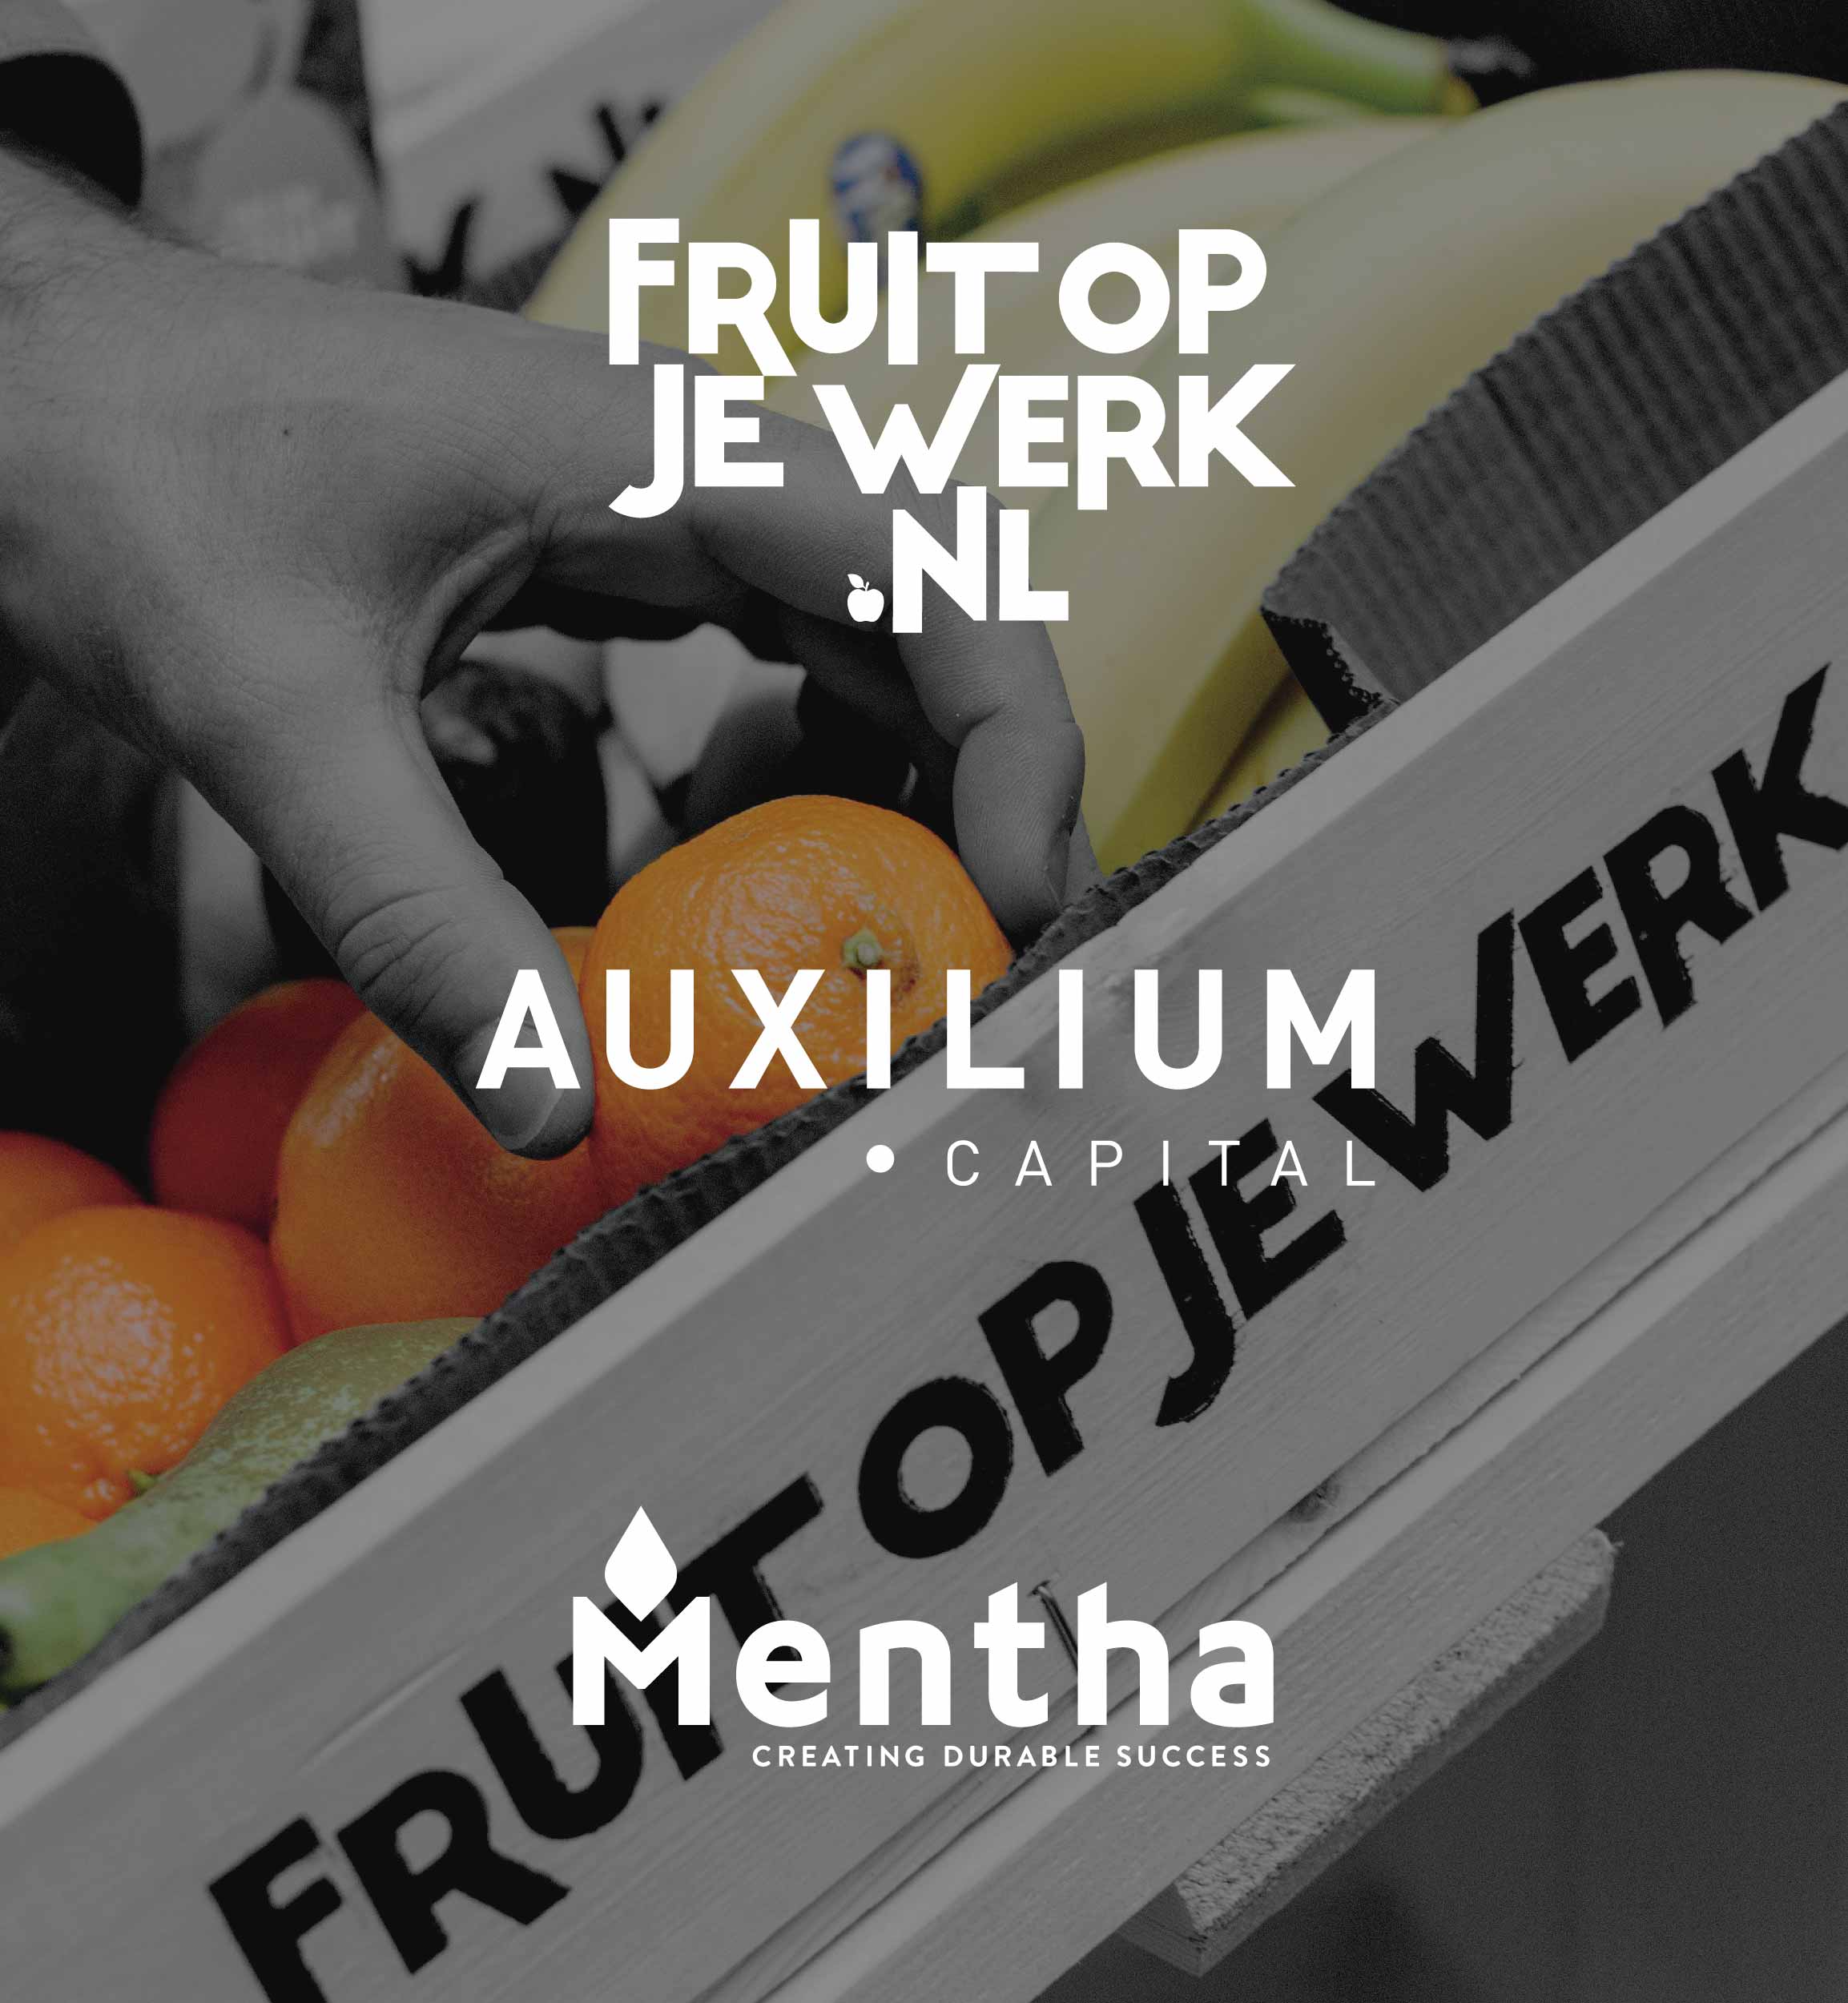 DEX international M&A acted as exclusive advisor to Auxilium Capital on the sale of FRUIT OP JE WERK to Mentha Capital